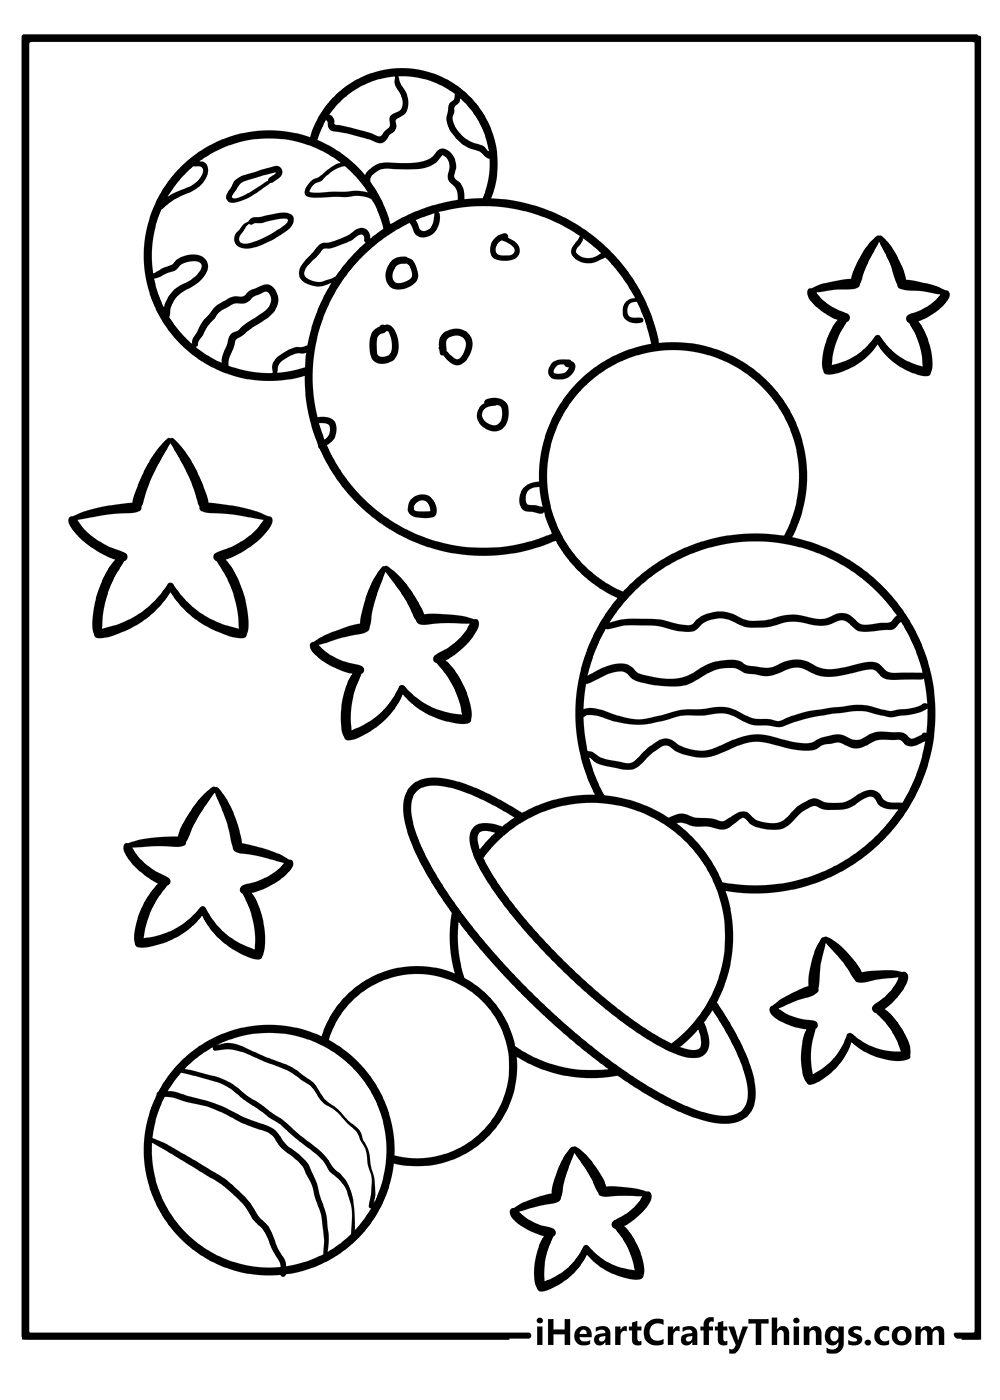 Printable Solar System Coloring Pages Updated 18